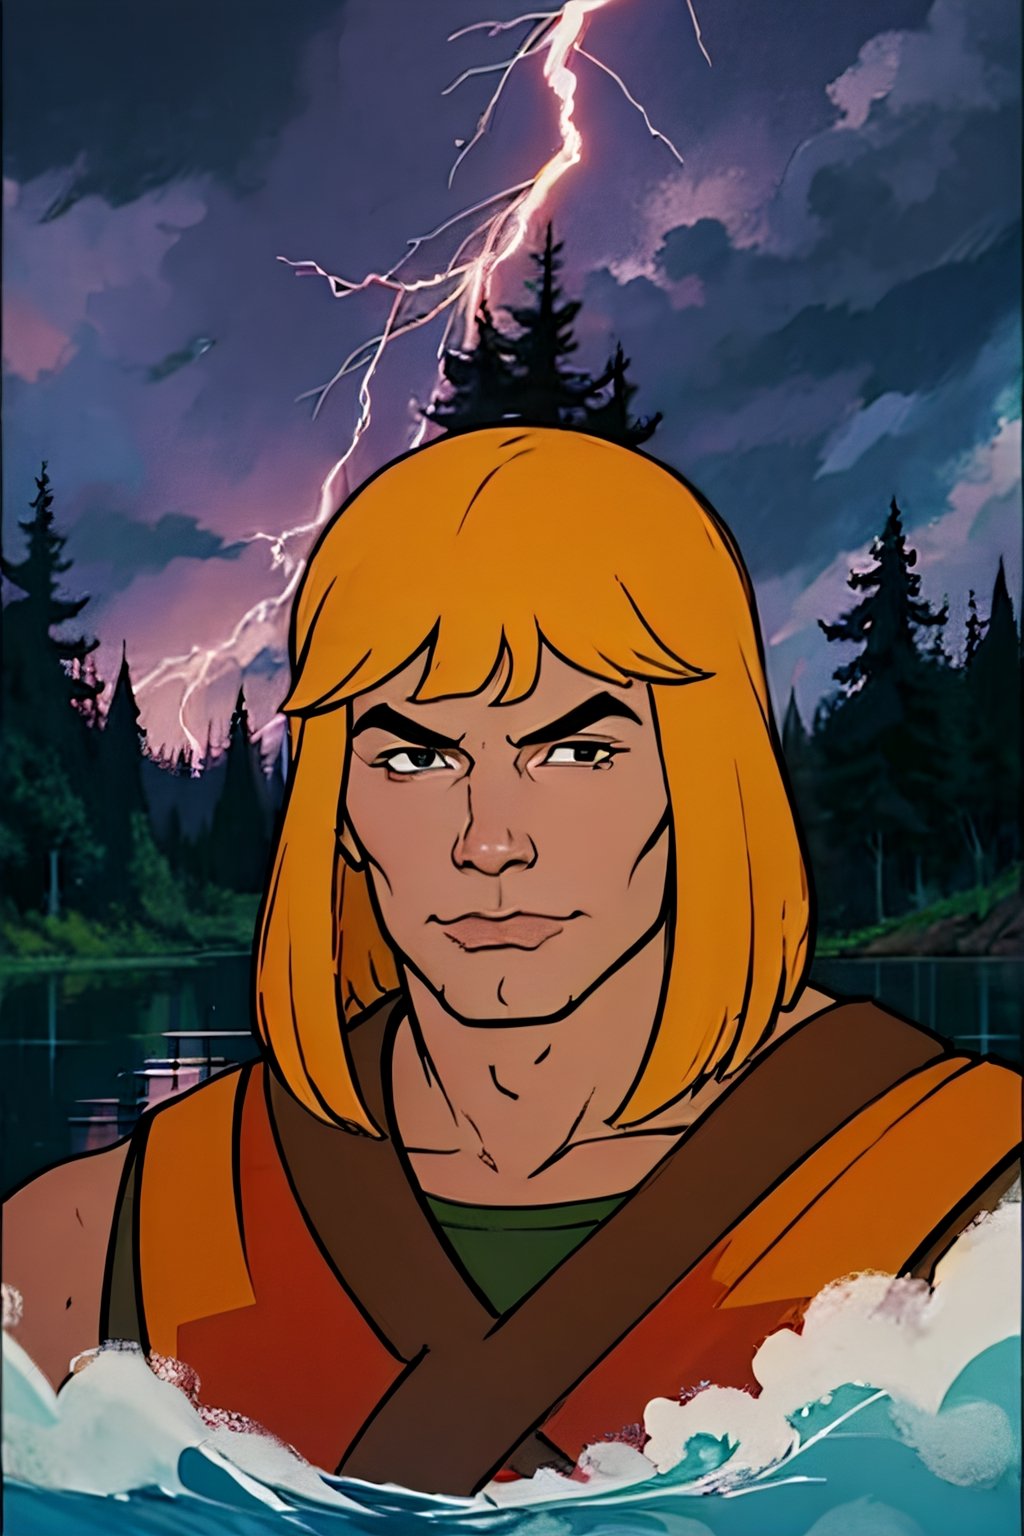 He-man, facial portrait, sexy stare, smirked, on top of hill, forest, lake, cloudy sky, lightning, ,he-man,